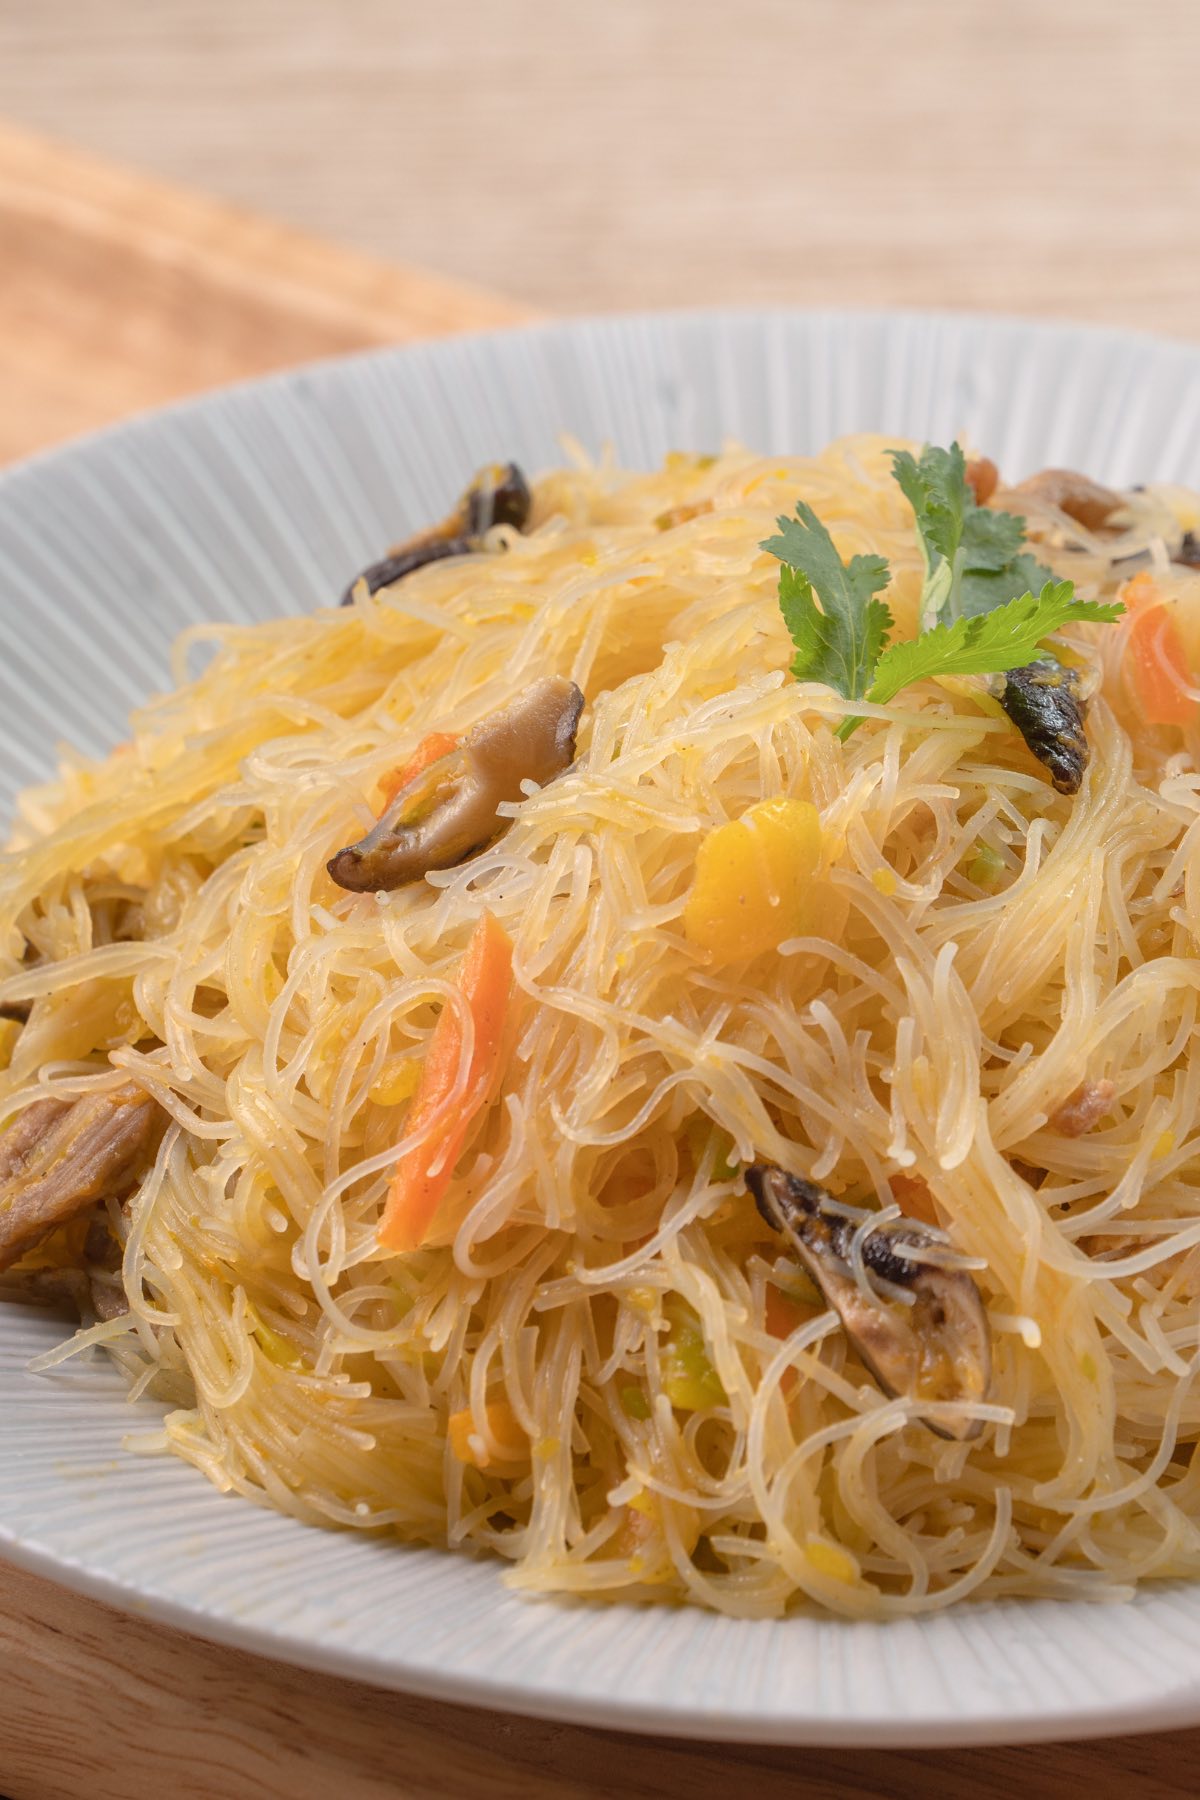 If you like Chinese or Vietnamese food, then you are certainly familiar with Vermicelli noodles. These noodles cook super fast and have a very nice texture. From stir-fries to soup, below are some of the Best Vermicelli Noodles Recipes that are easy to make at home but better than the ones from restaurants!